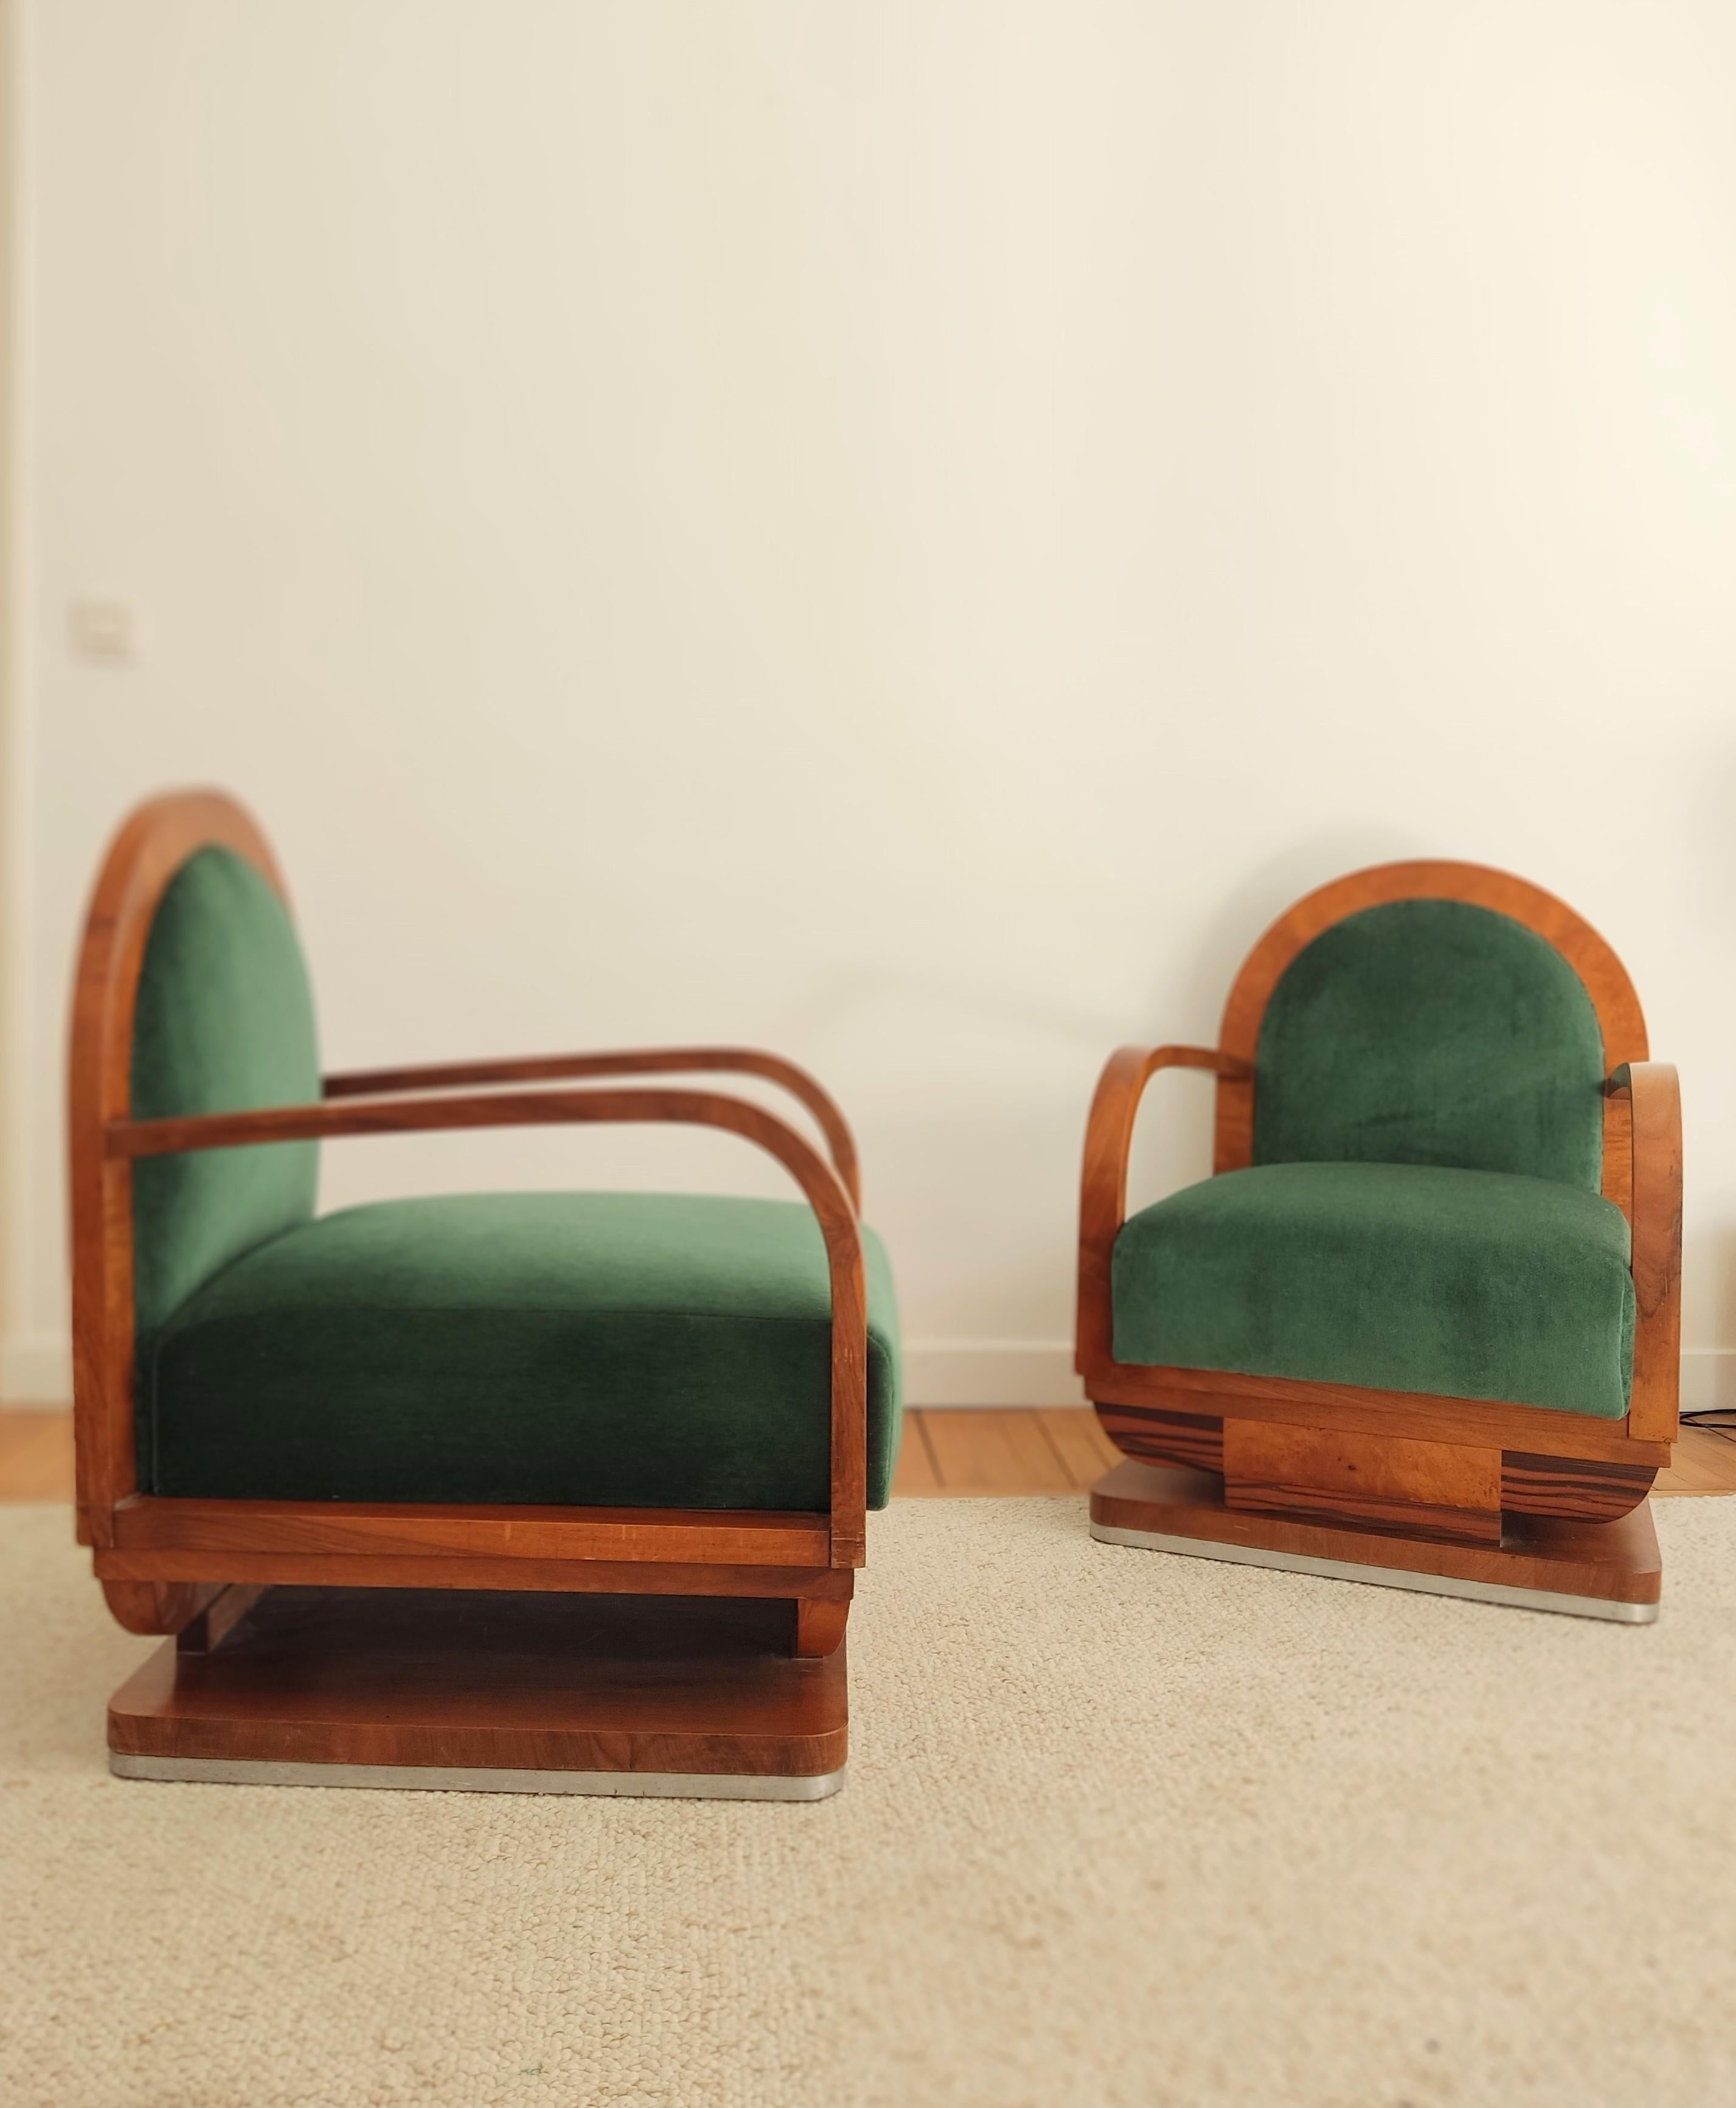 Elegant pair of rounded armchairs in an art deco style. Nice wood work, especially with veined details at the feet. reupholstery in a green mohair velvet. 